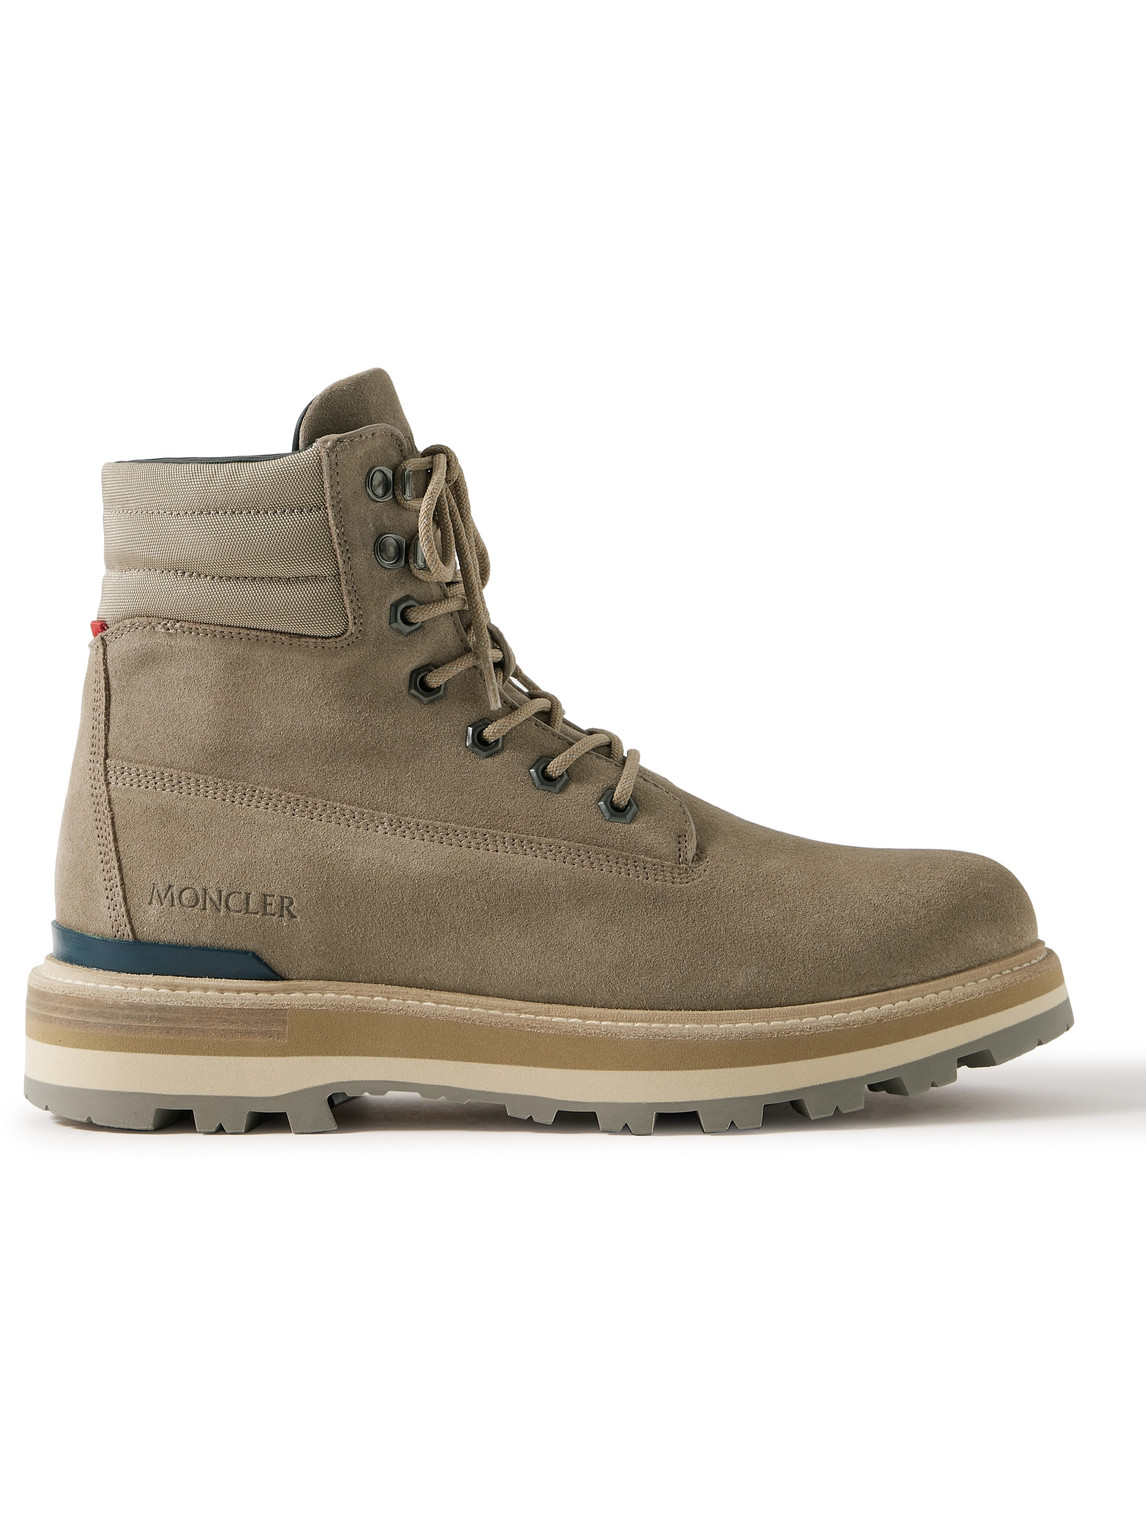 Moncler Peka Trek Nylon-trimmed Suede Hiking Boots In Neutrals